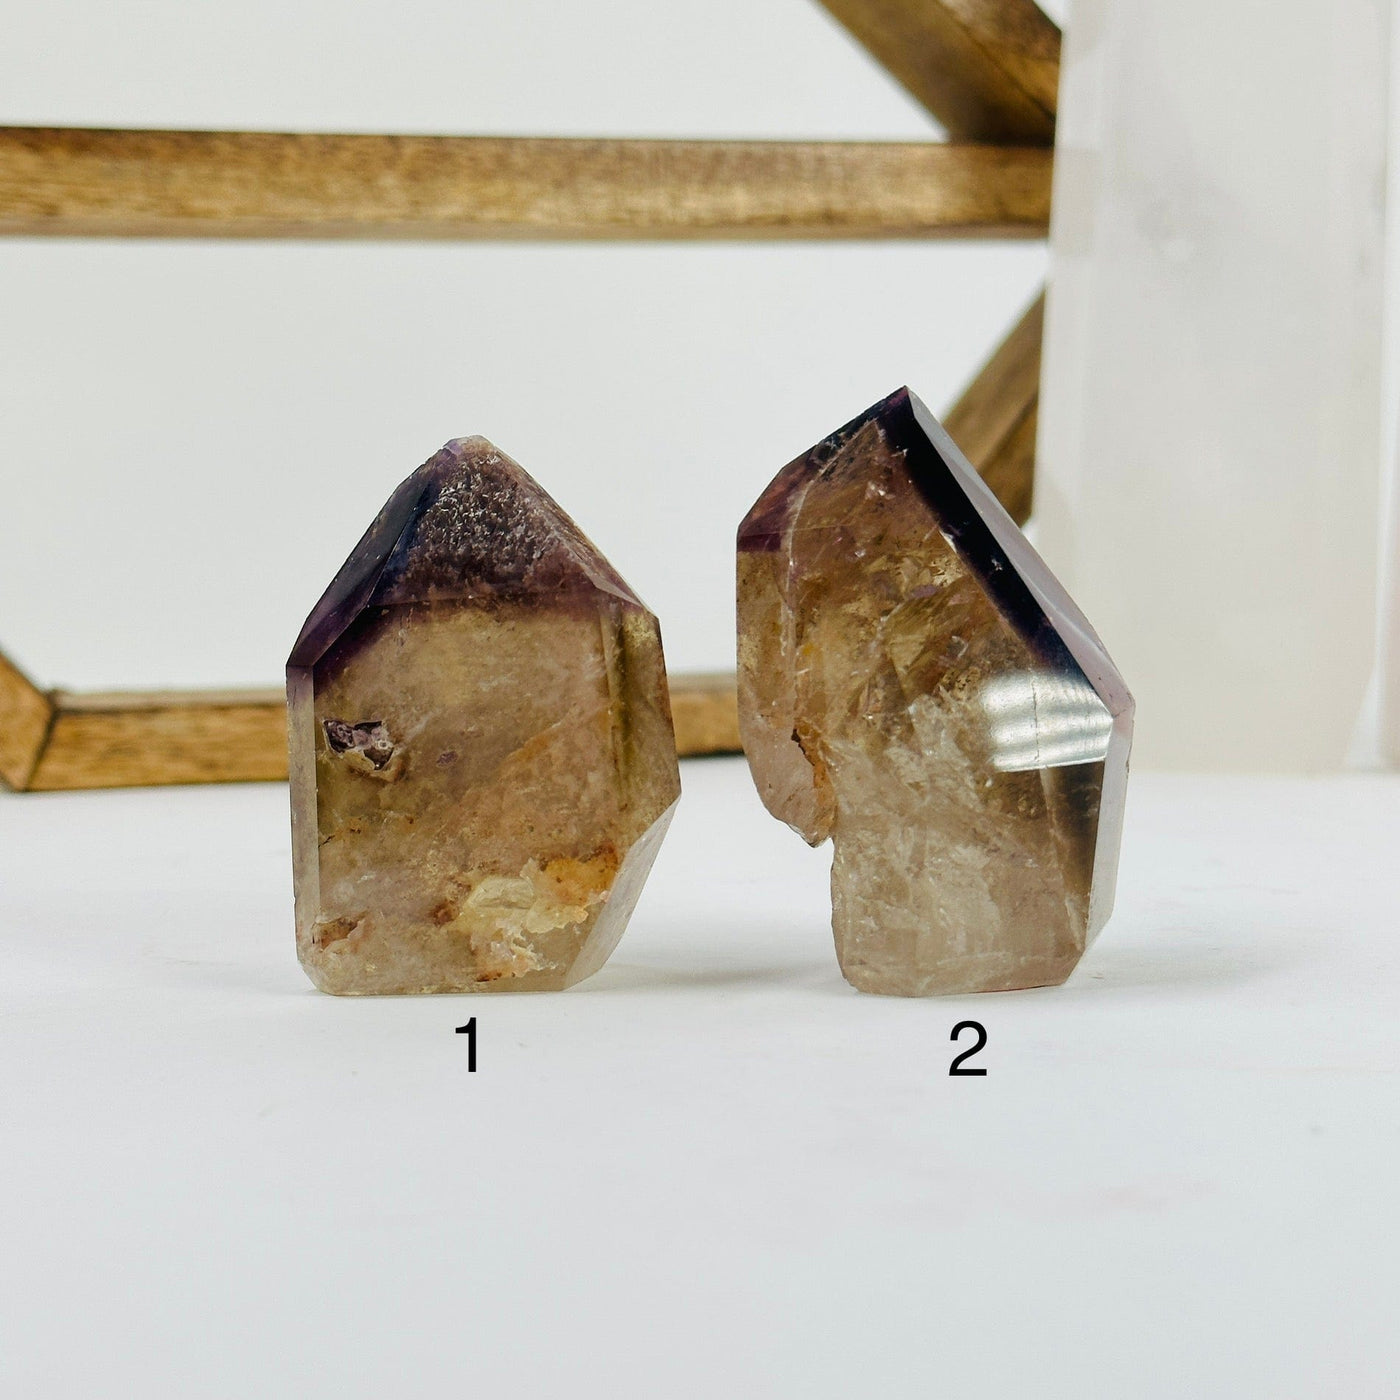 ametrine polished points with decorations in the background